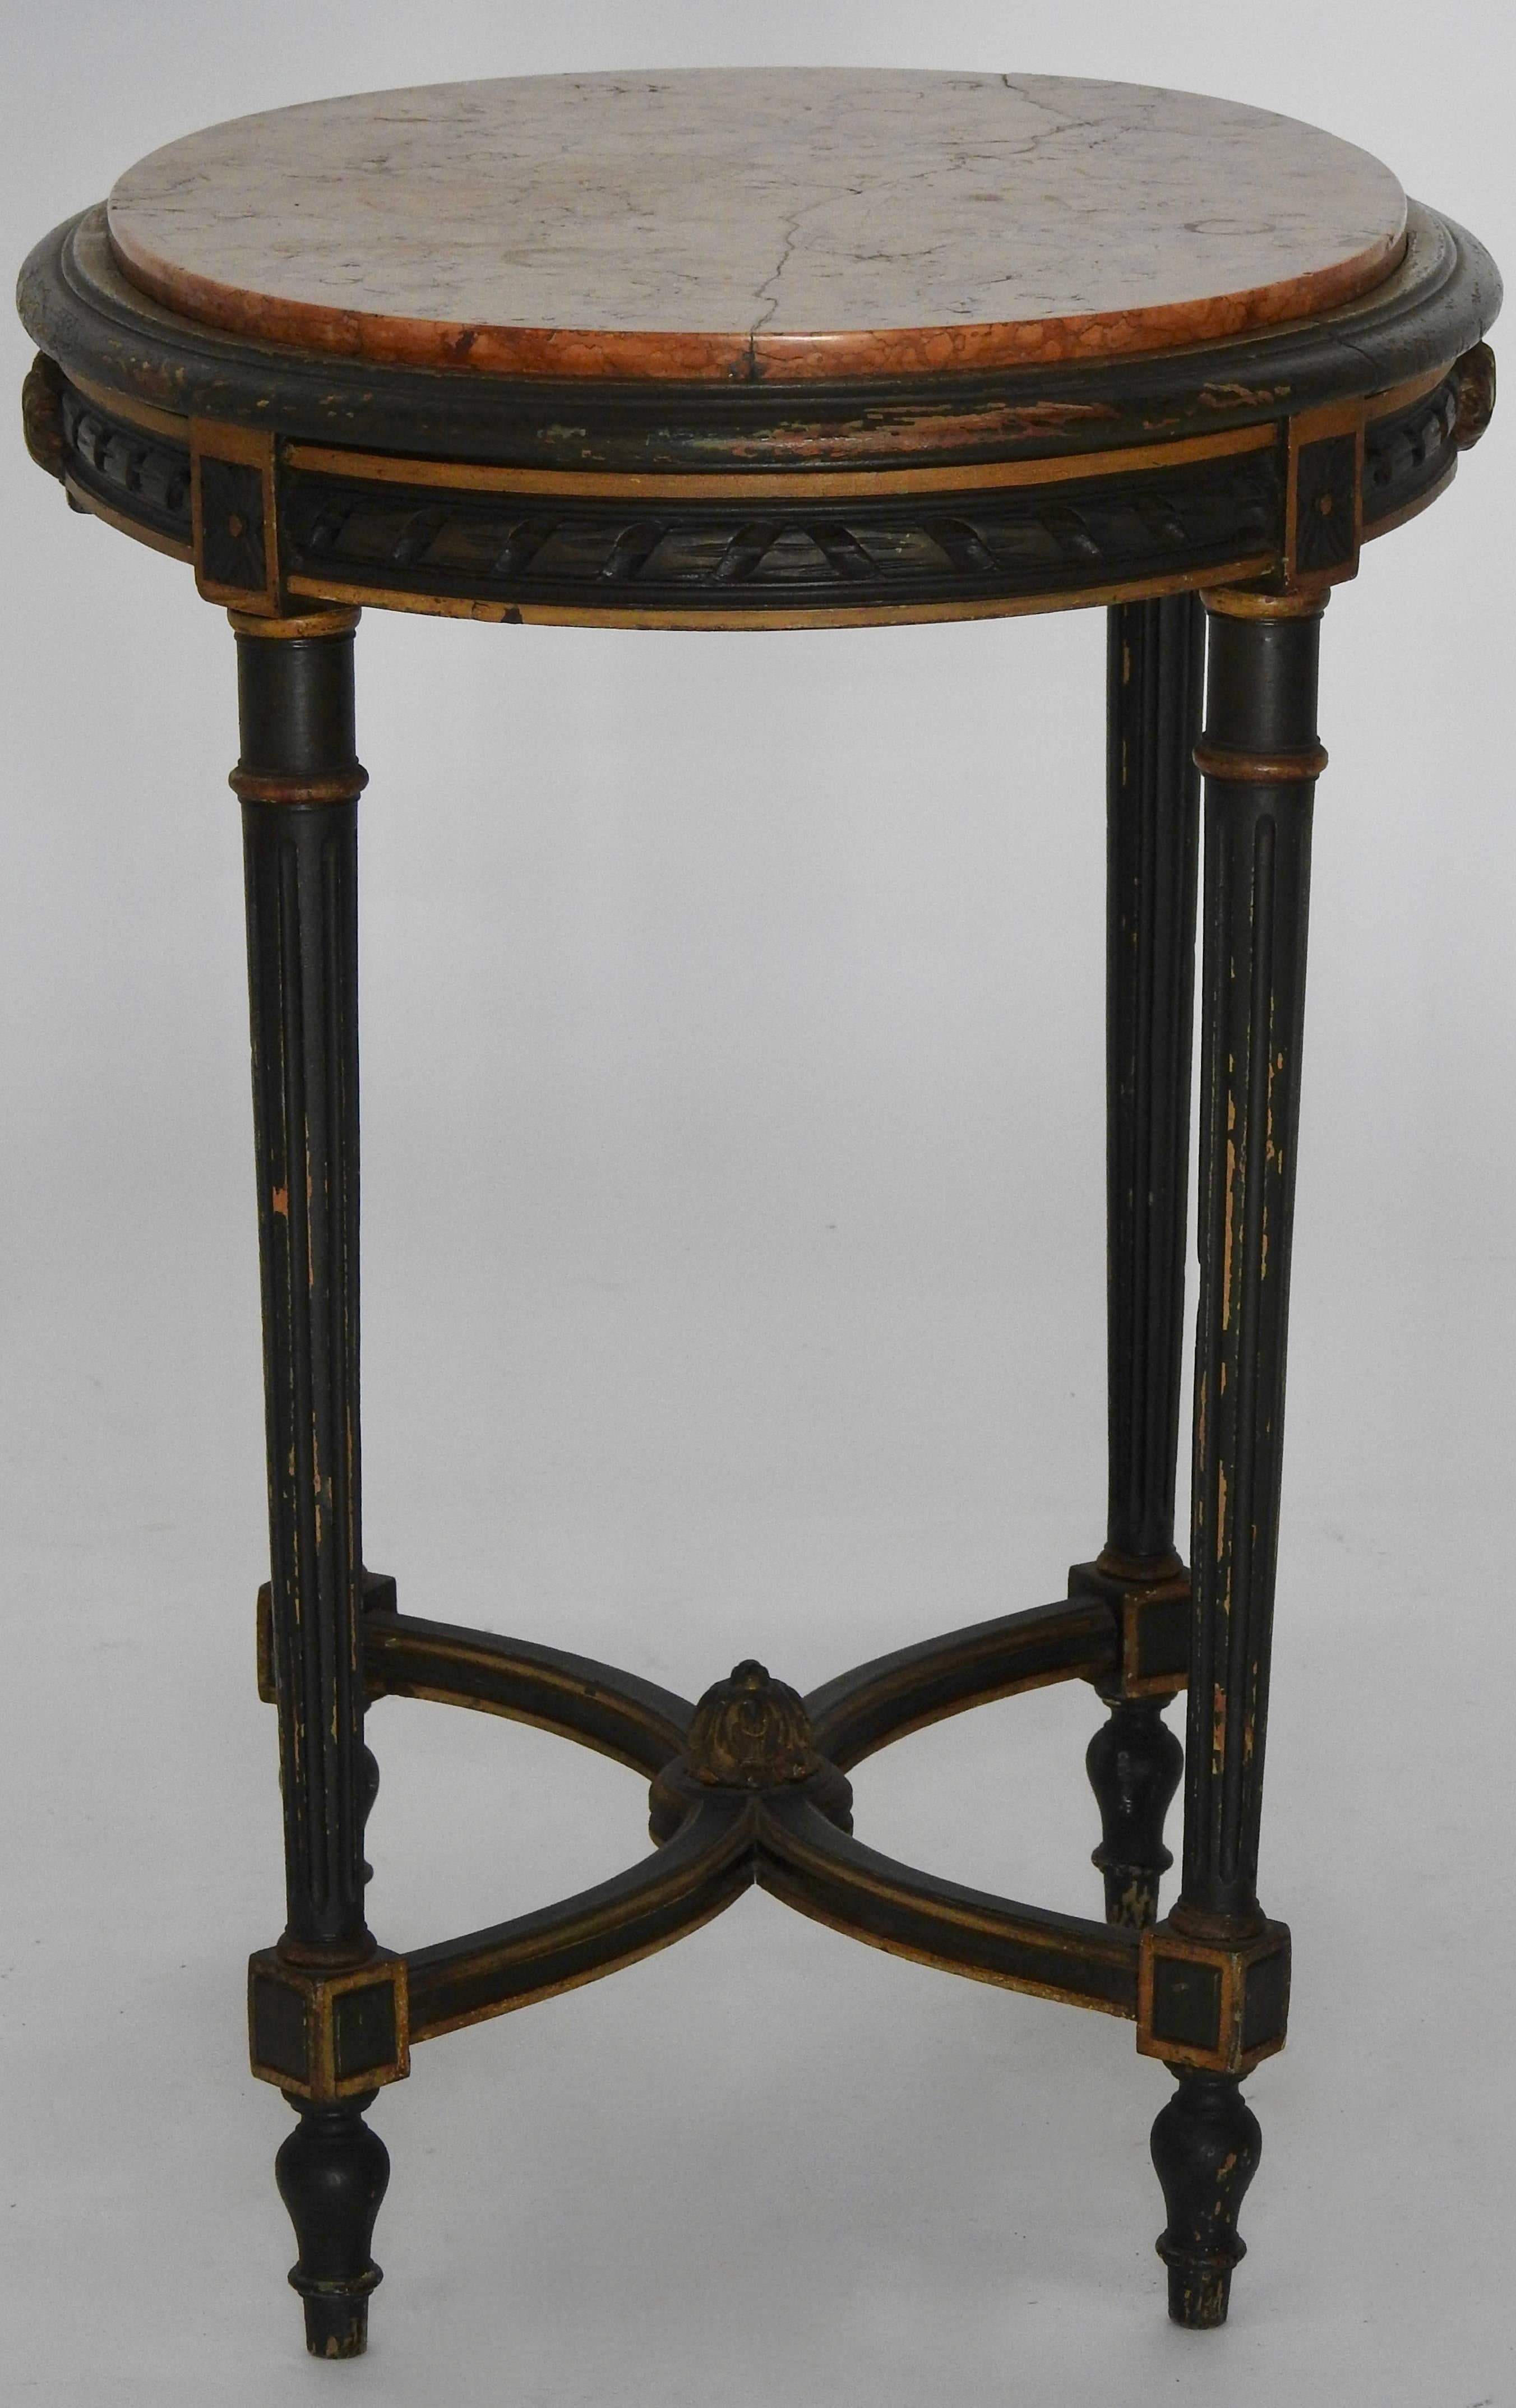 This table is in a gorgeous dark green paint with gilding detailing. The marble is of warm red tones. The marble has had a repair done. Table stands on four round tapered legs with curved stretchers. Decorated with finials and carving details.